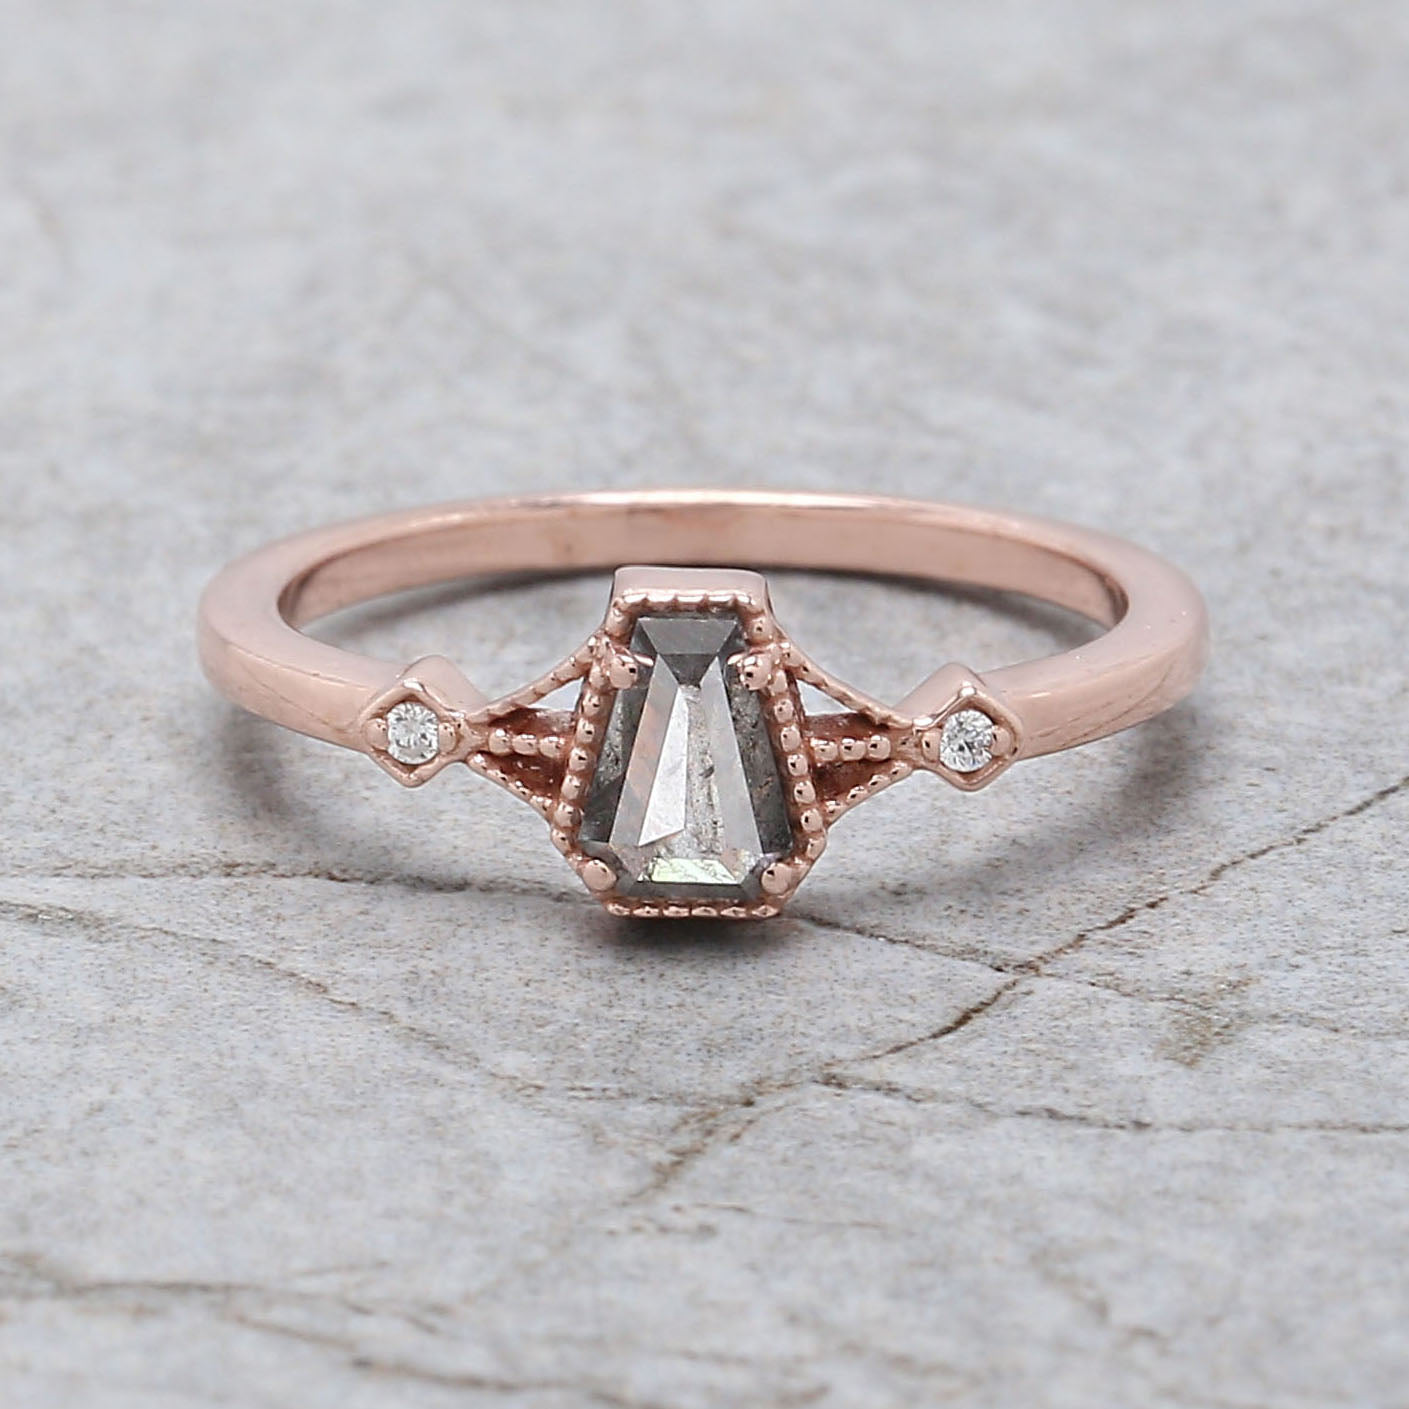 Coffin Cut Salt And Pepper Diamond Ring 0.42 Ct 5.56 MM Coffin Diamond Ring 14K Solid Rose Gold Silver Engagement Ring Gift For Her QL2159